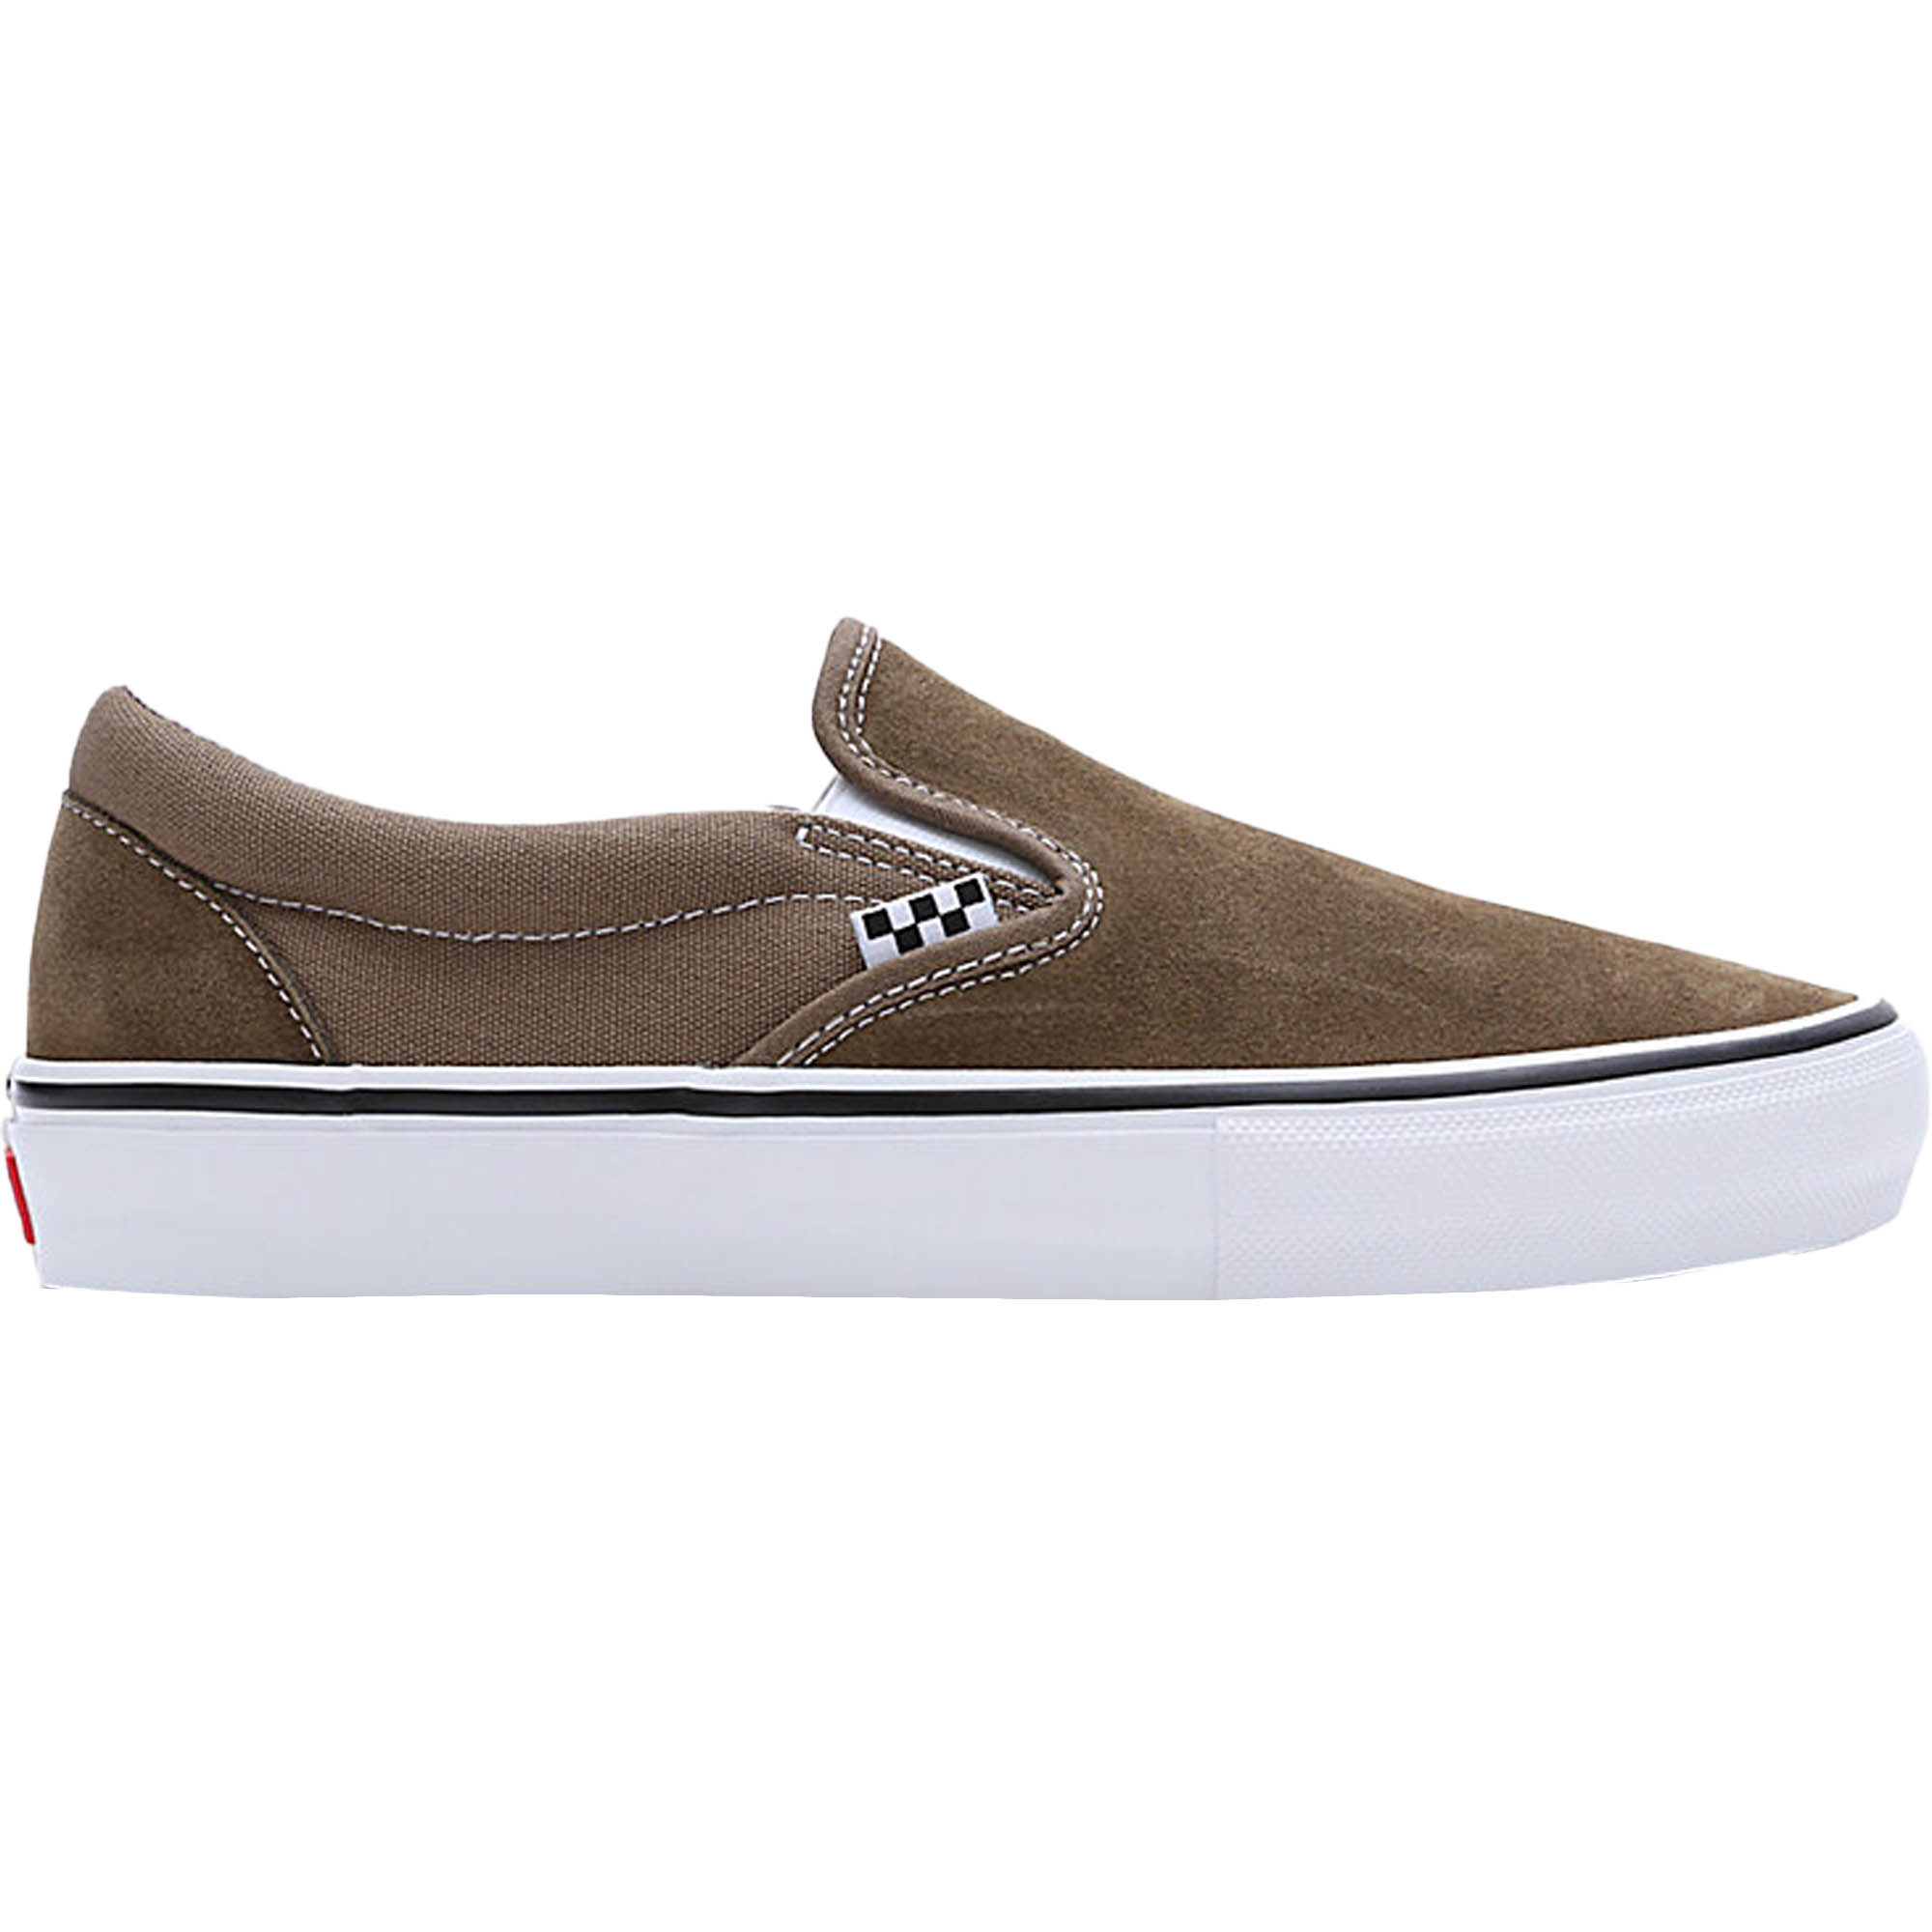 Vans Classic Slip On Skate Shoes/Trainers